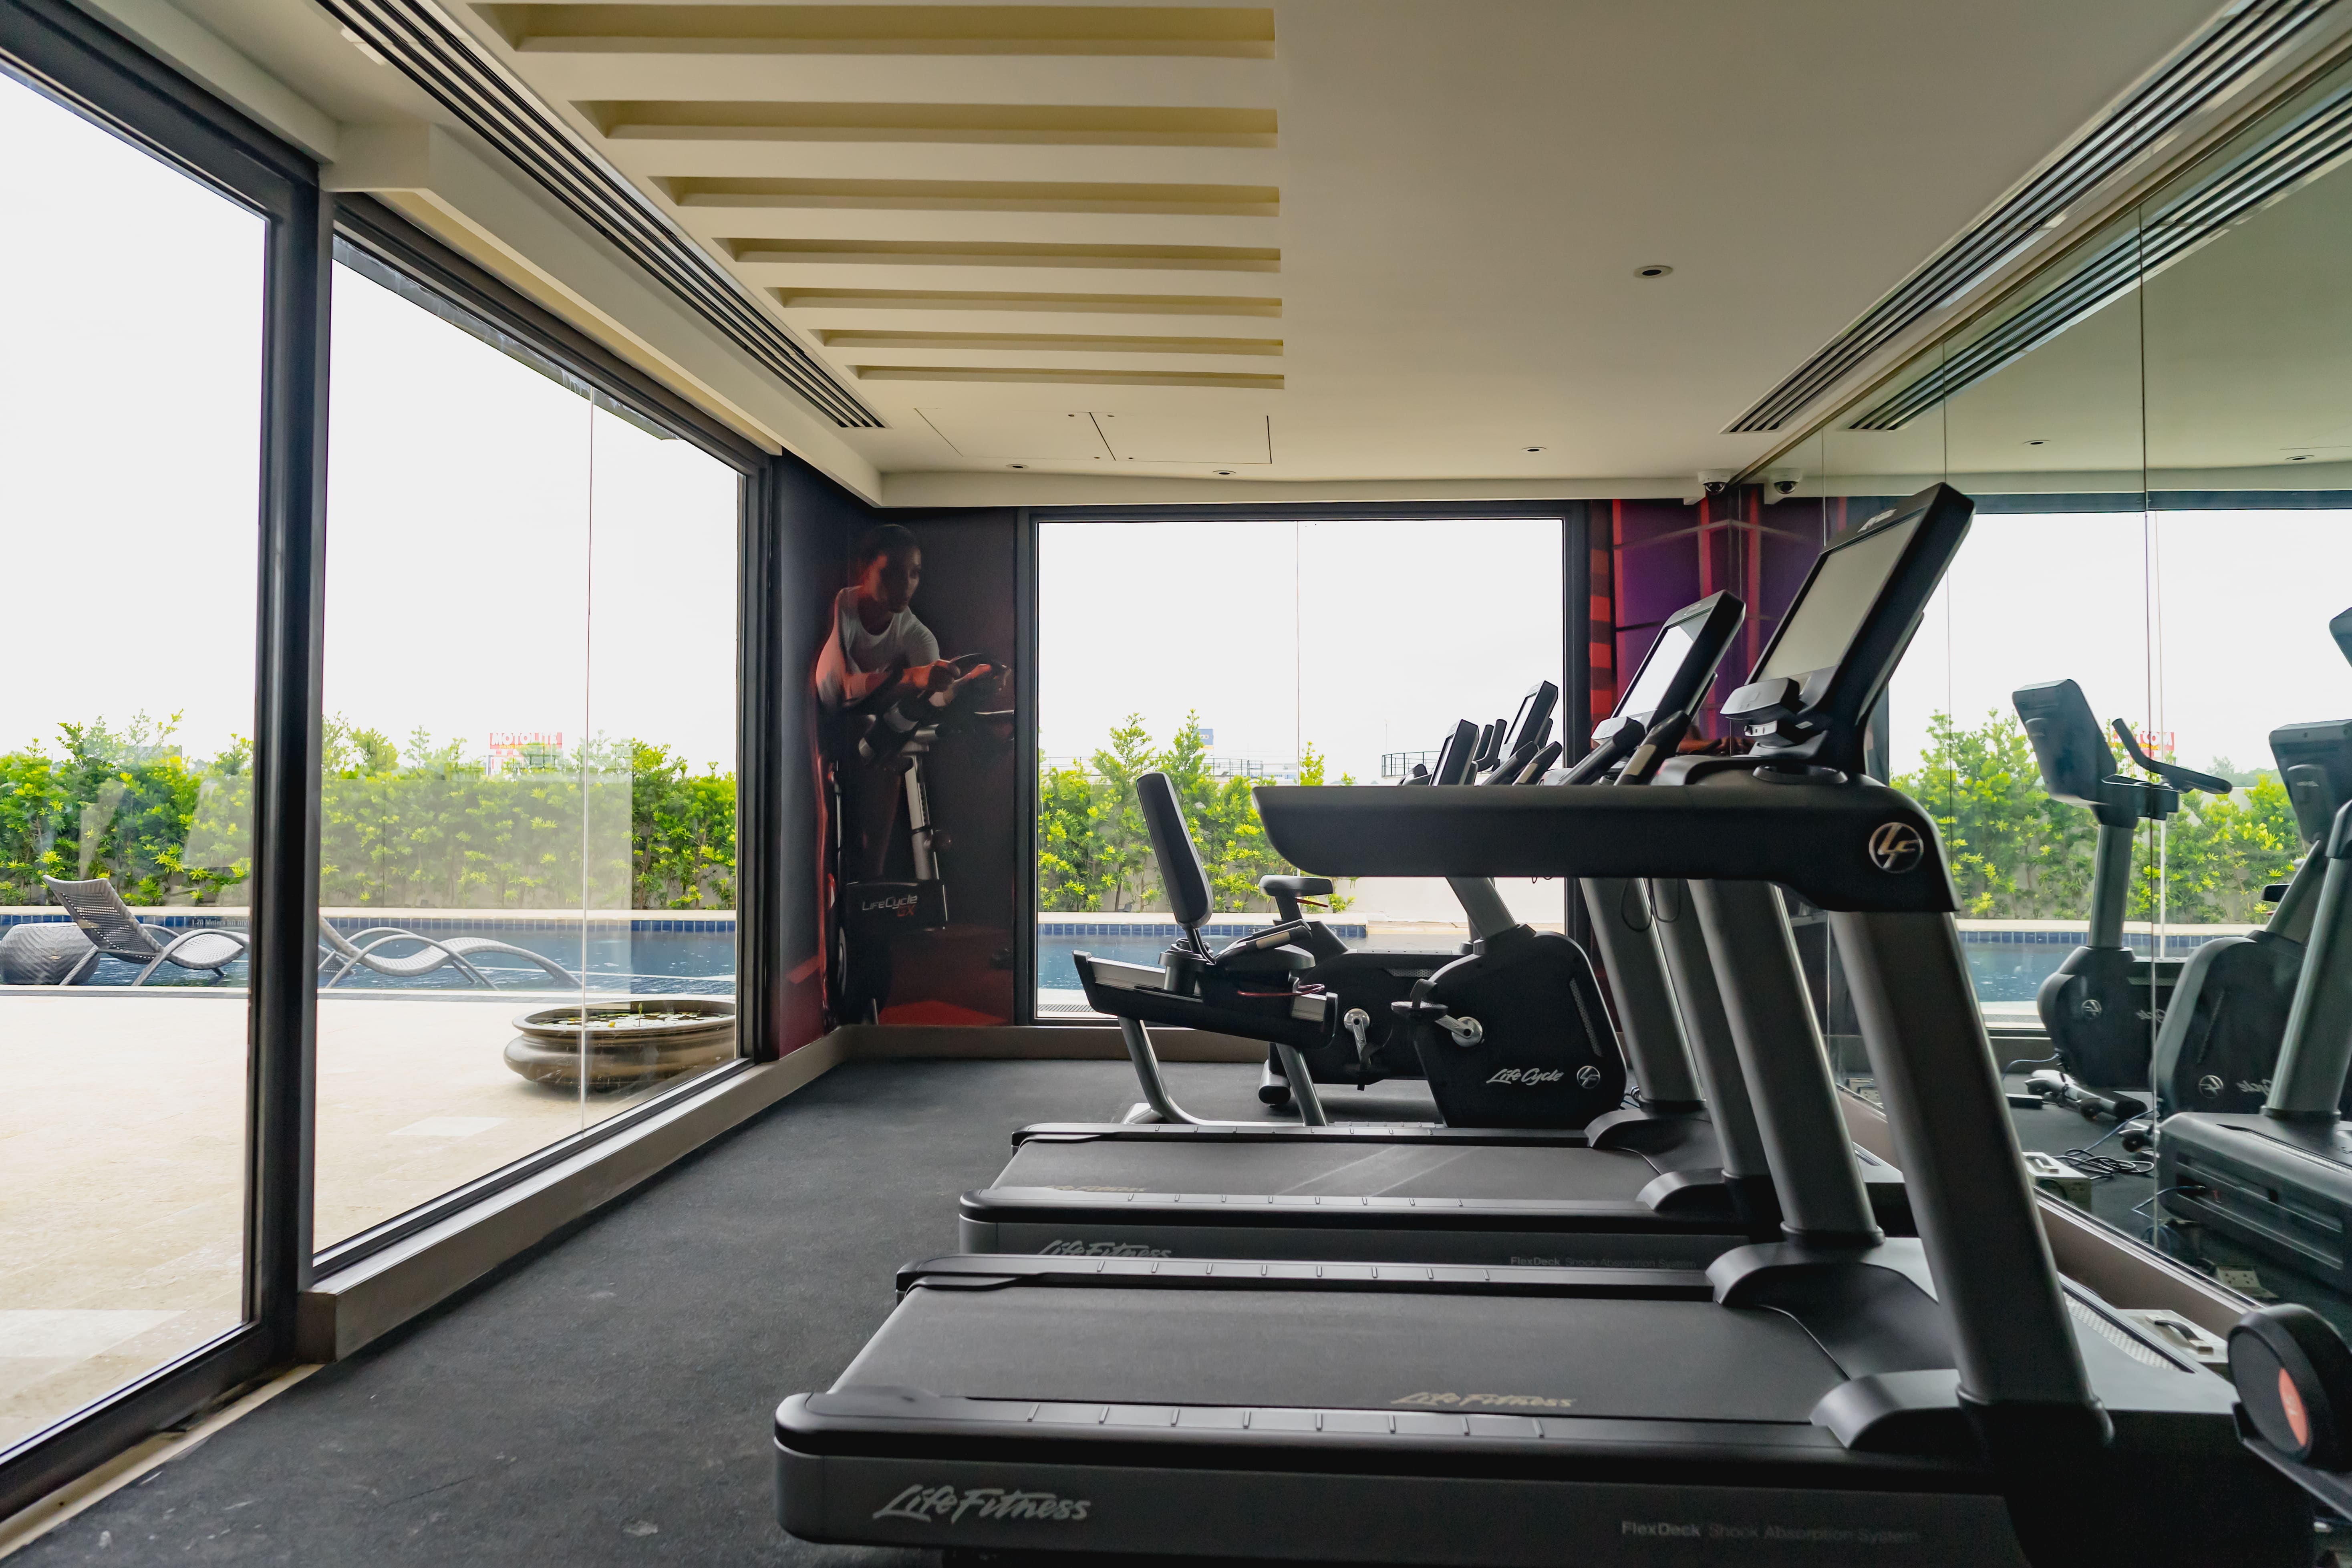 a condo amenity with treadmills and exercise machines